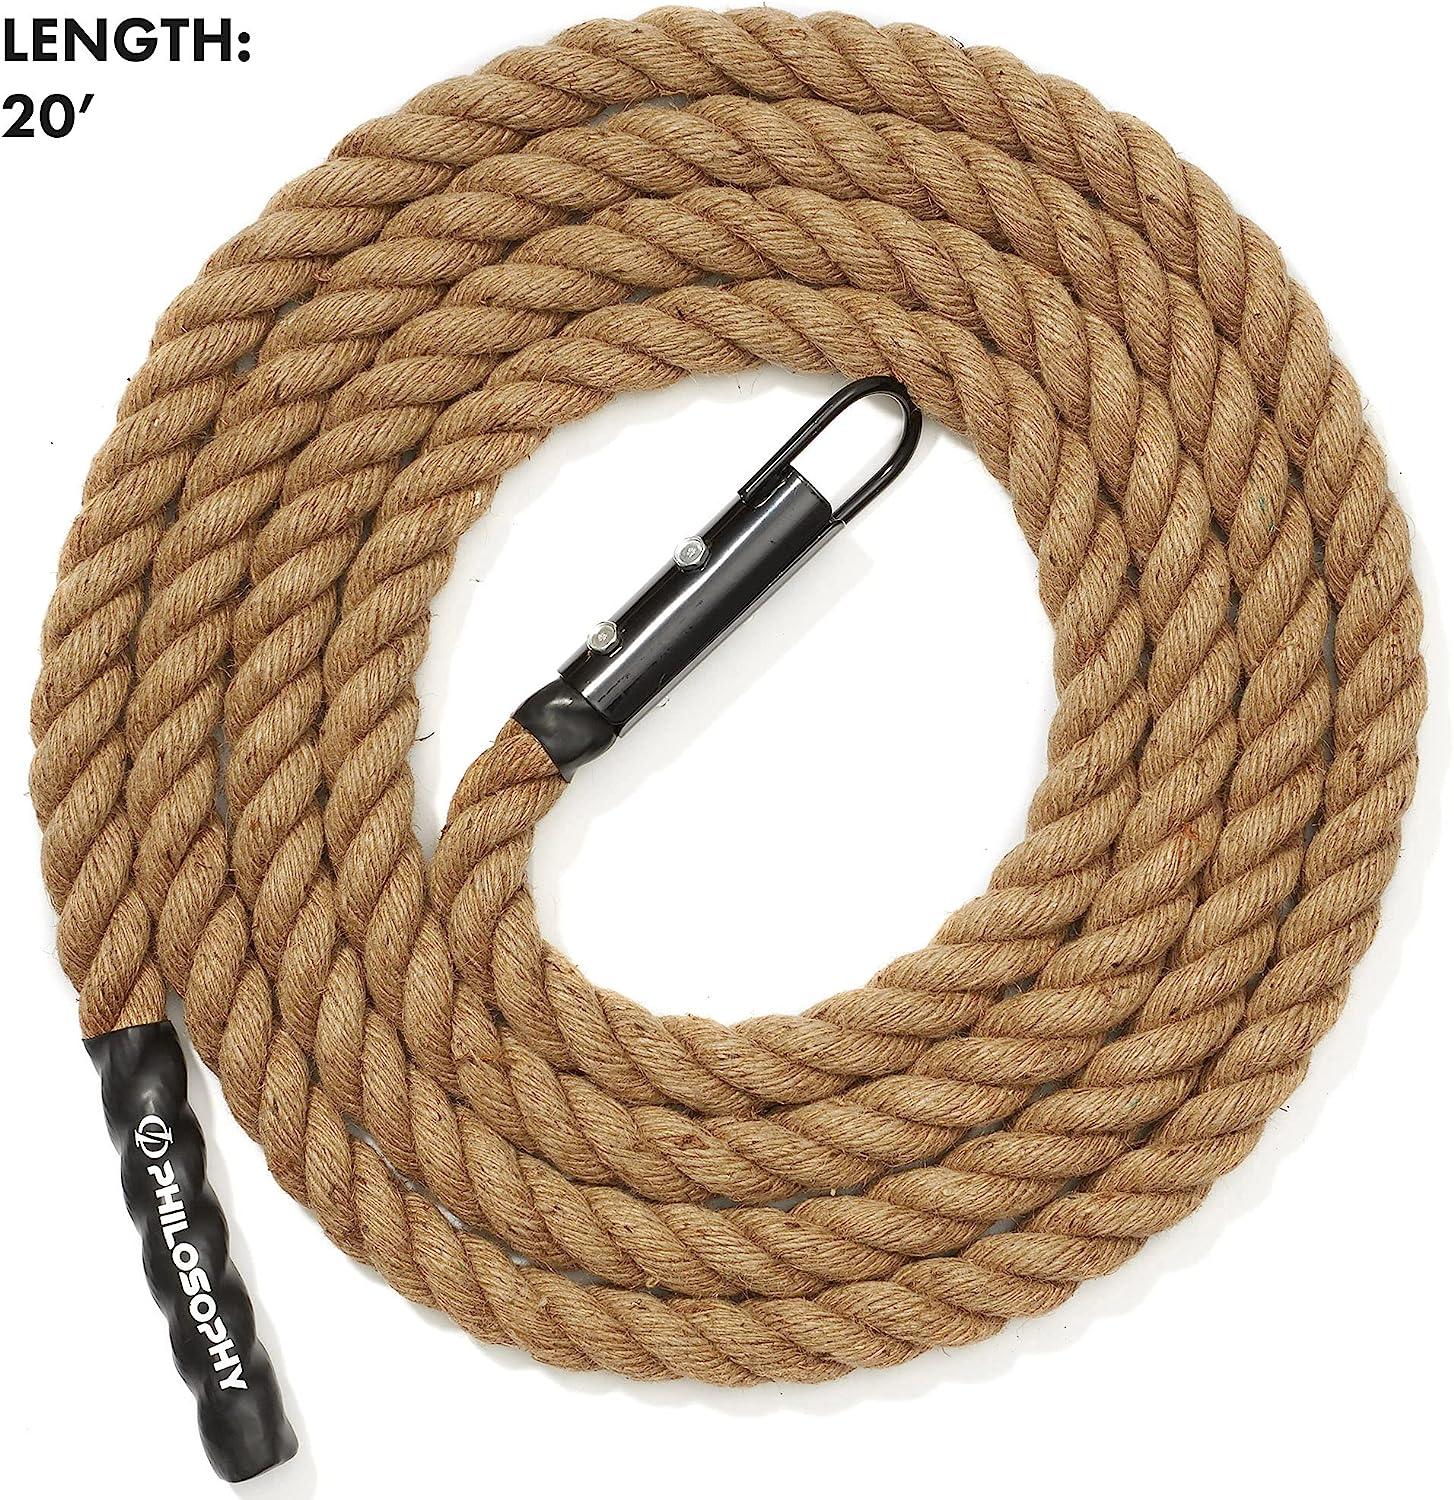 Philosophy Gym Indoor/Outdoor Exercise Climbing Rope - 1.5 Inch